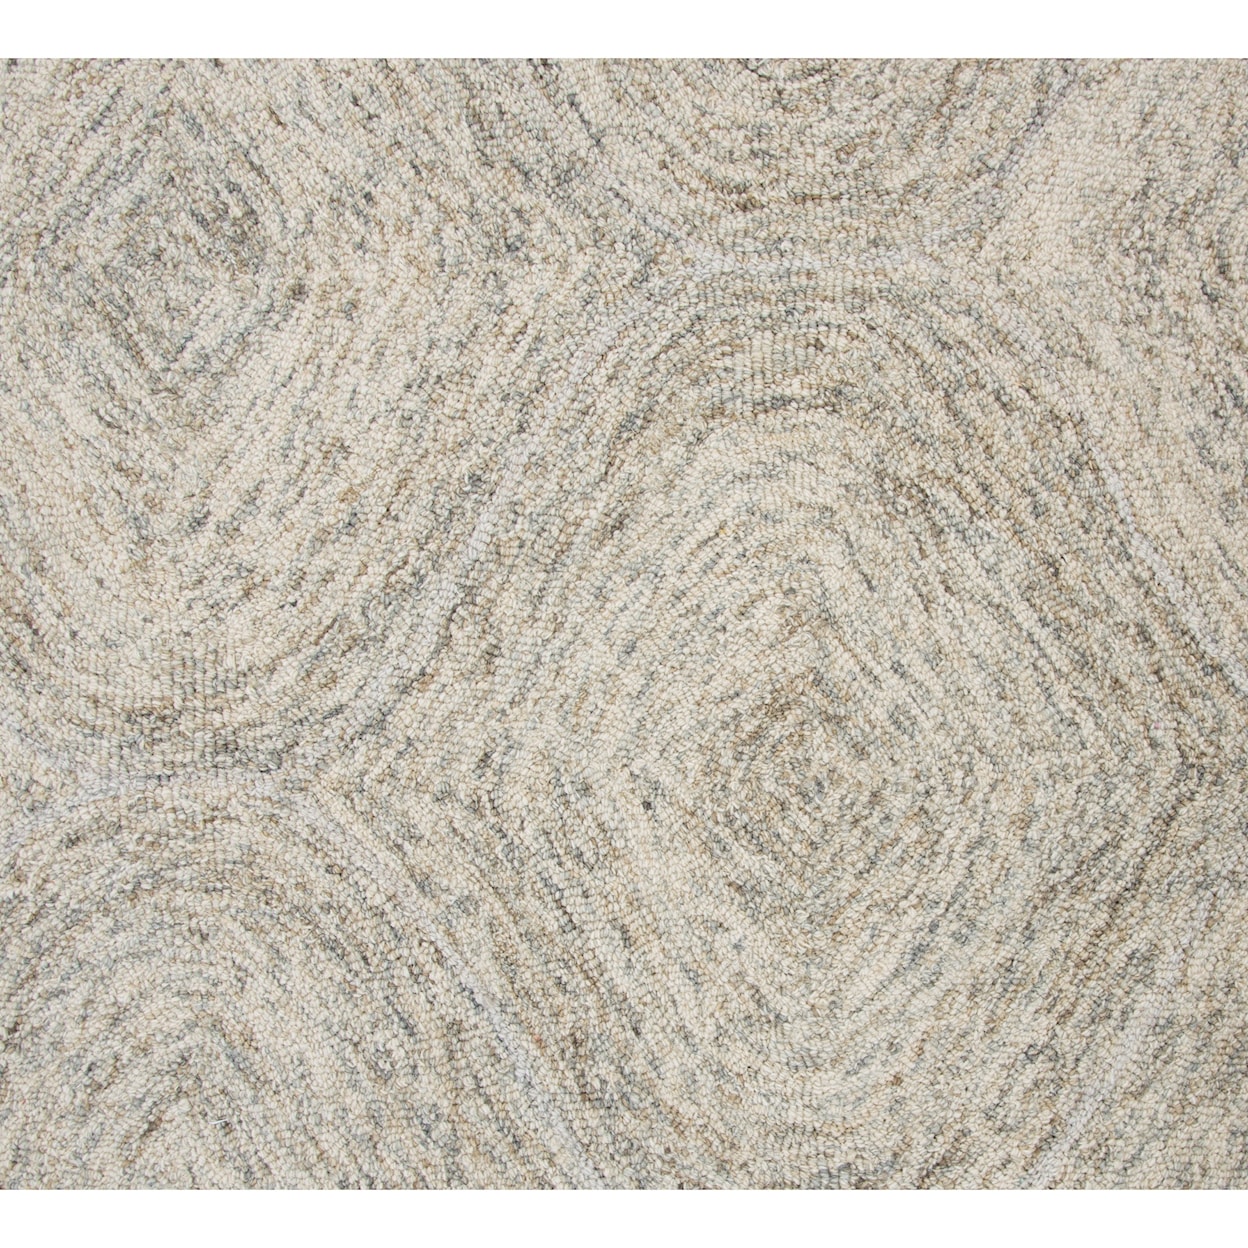 Rizzy Home Brindleton 5' x 8' Rectangle Rug